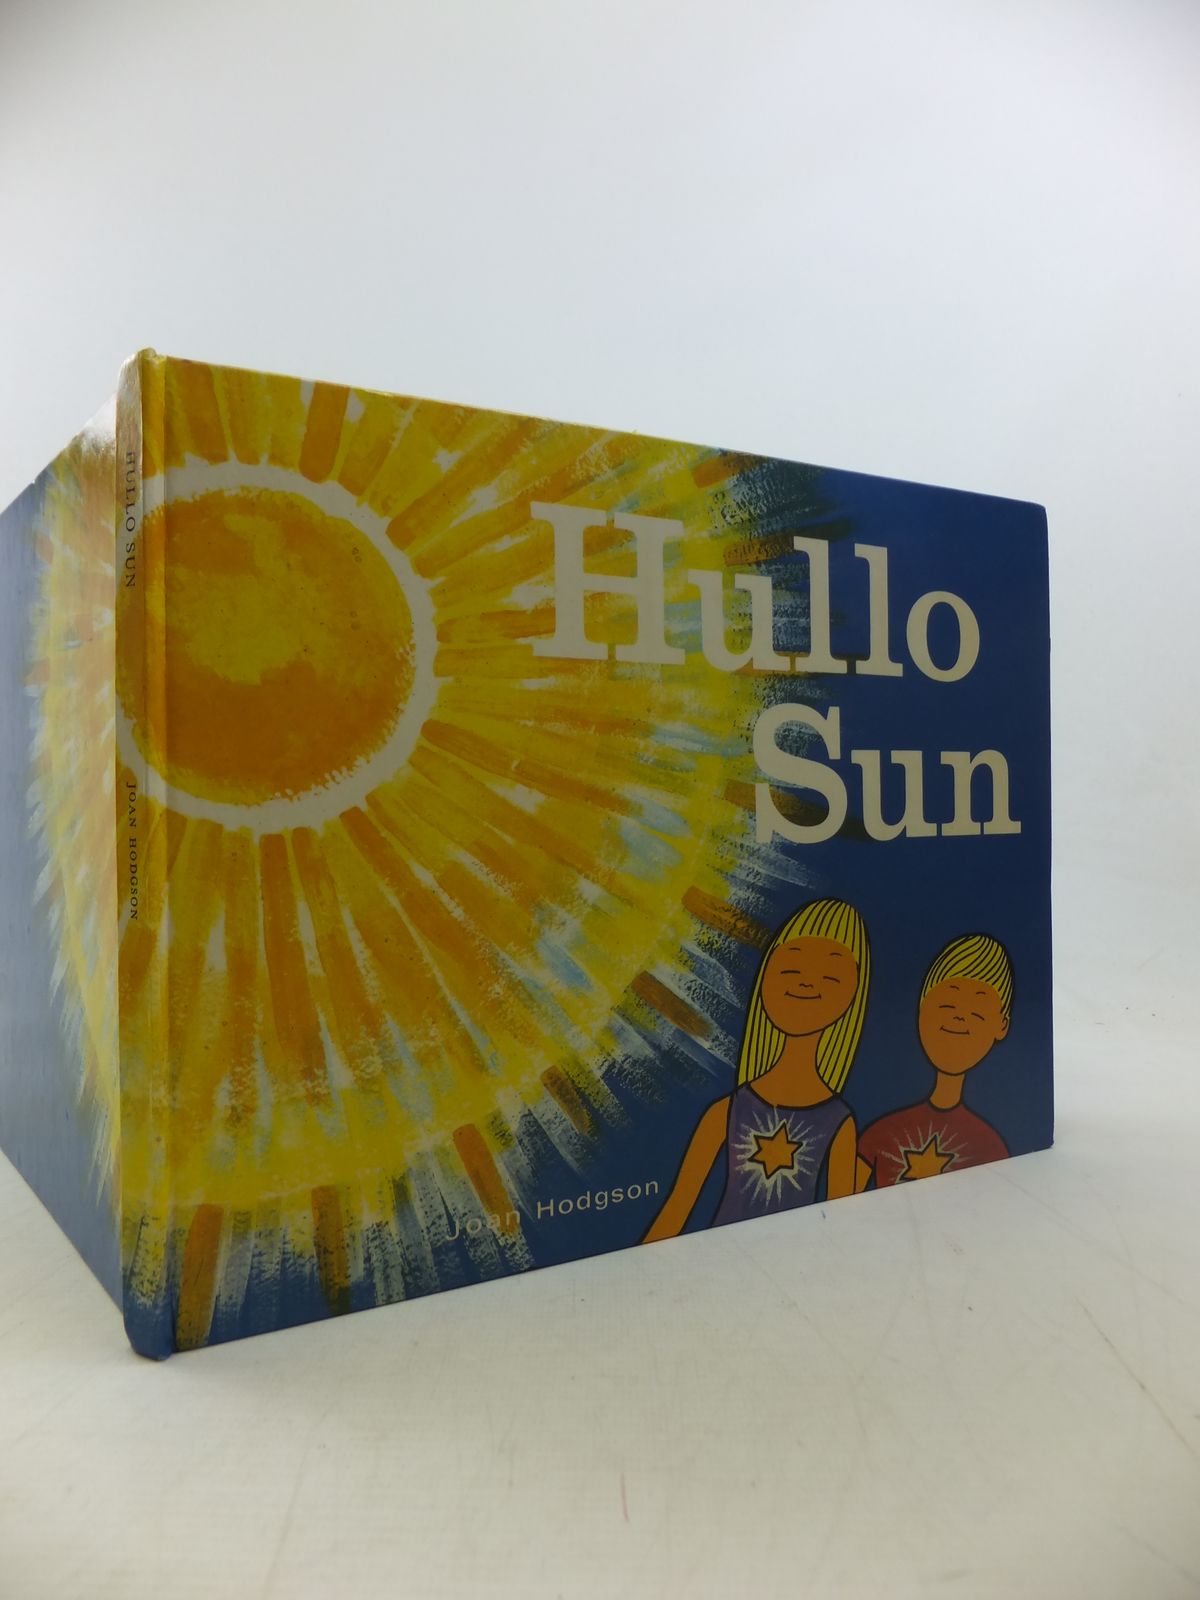 Photo of HULLO SUN! written by Hodgson, Joan illustrated by Ripper, Peter published by The White Eagle Publishing Trust (STOCK CODE: 1811233)  for sale by Stella & Rose's Books